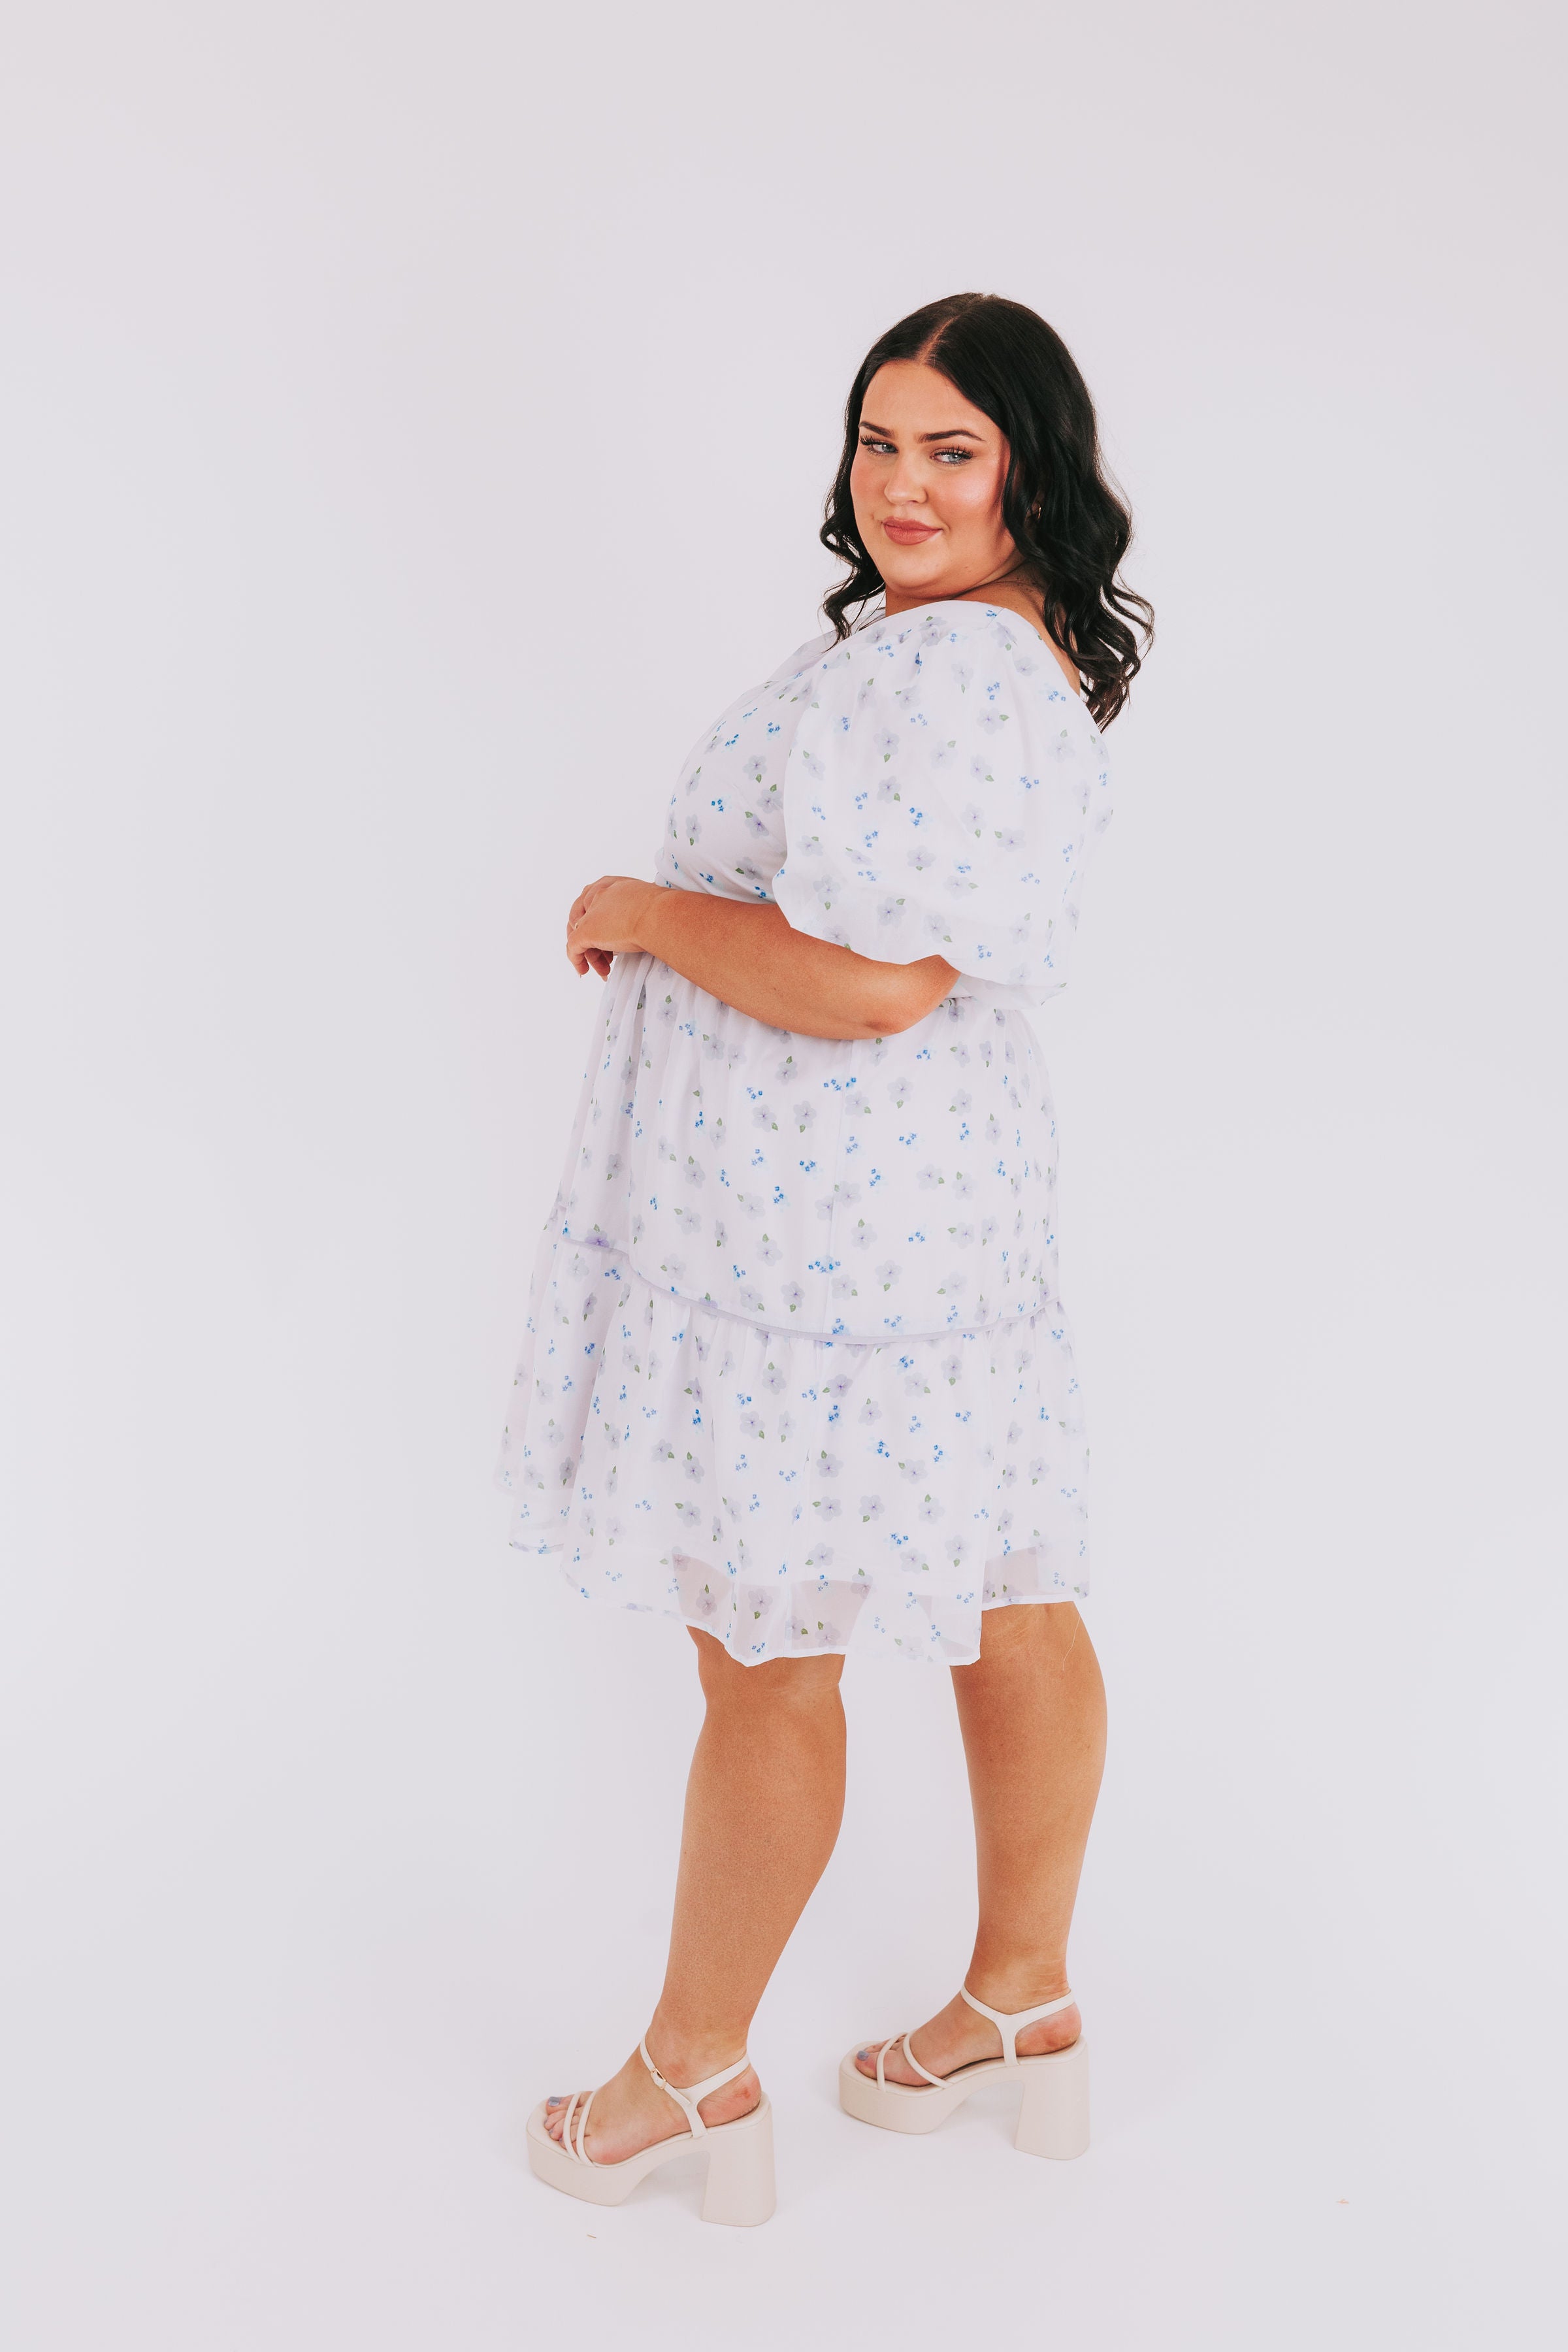 PLUS SIZE - Searching For Love Dress